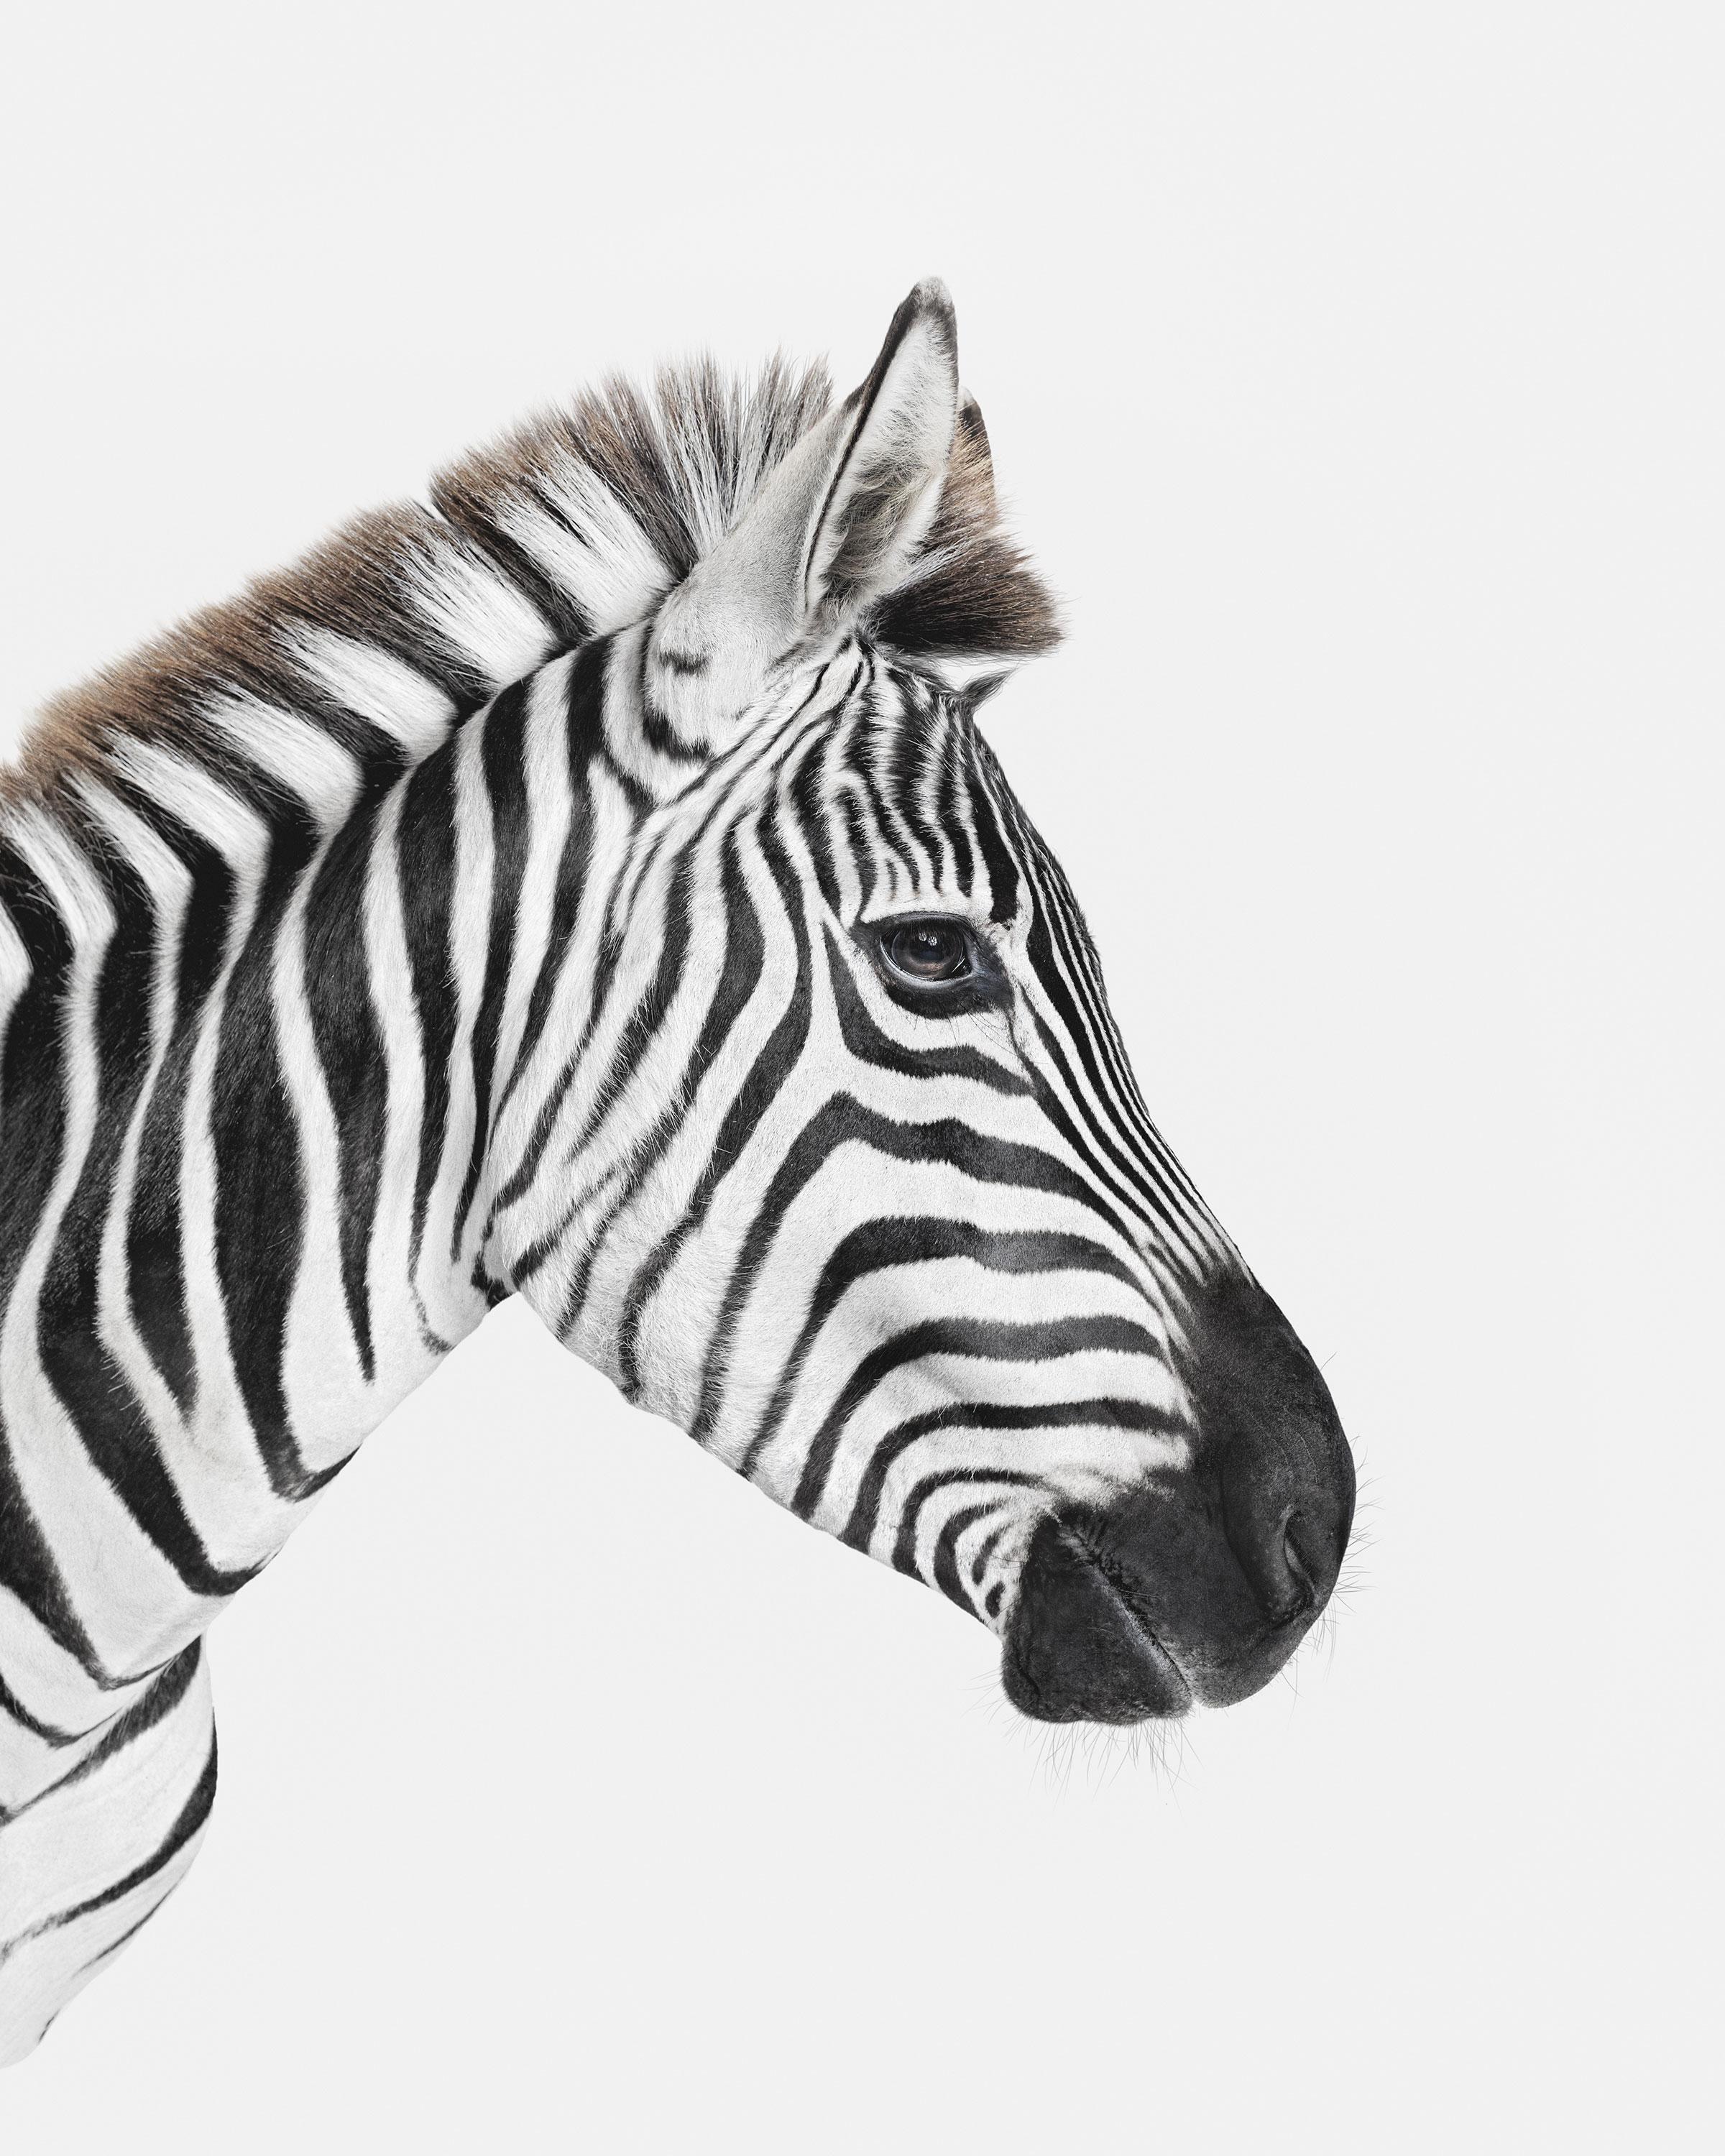 Randal Ford - Zebra Profile, Photography 2018, Printed After